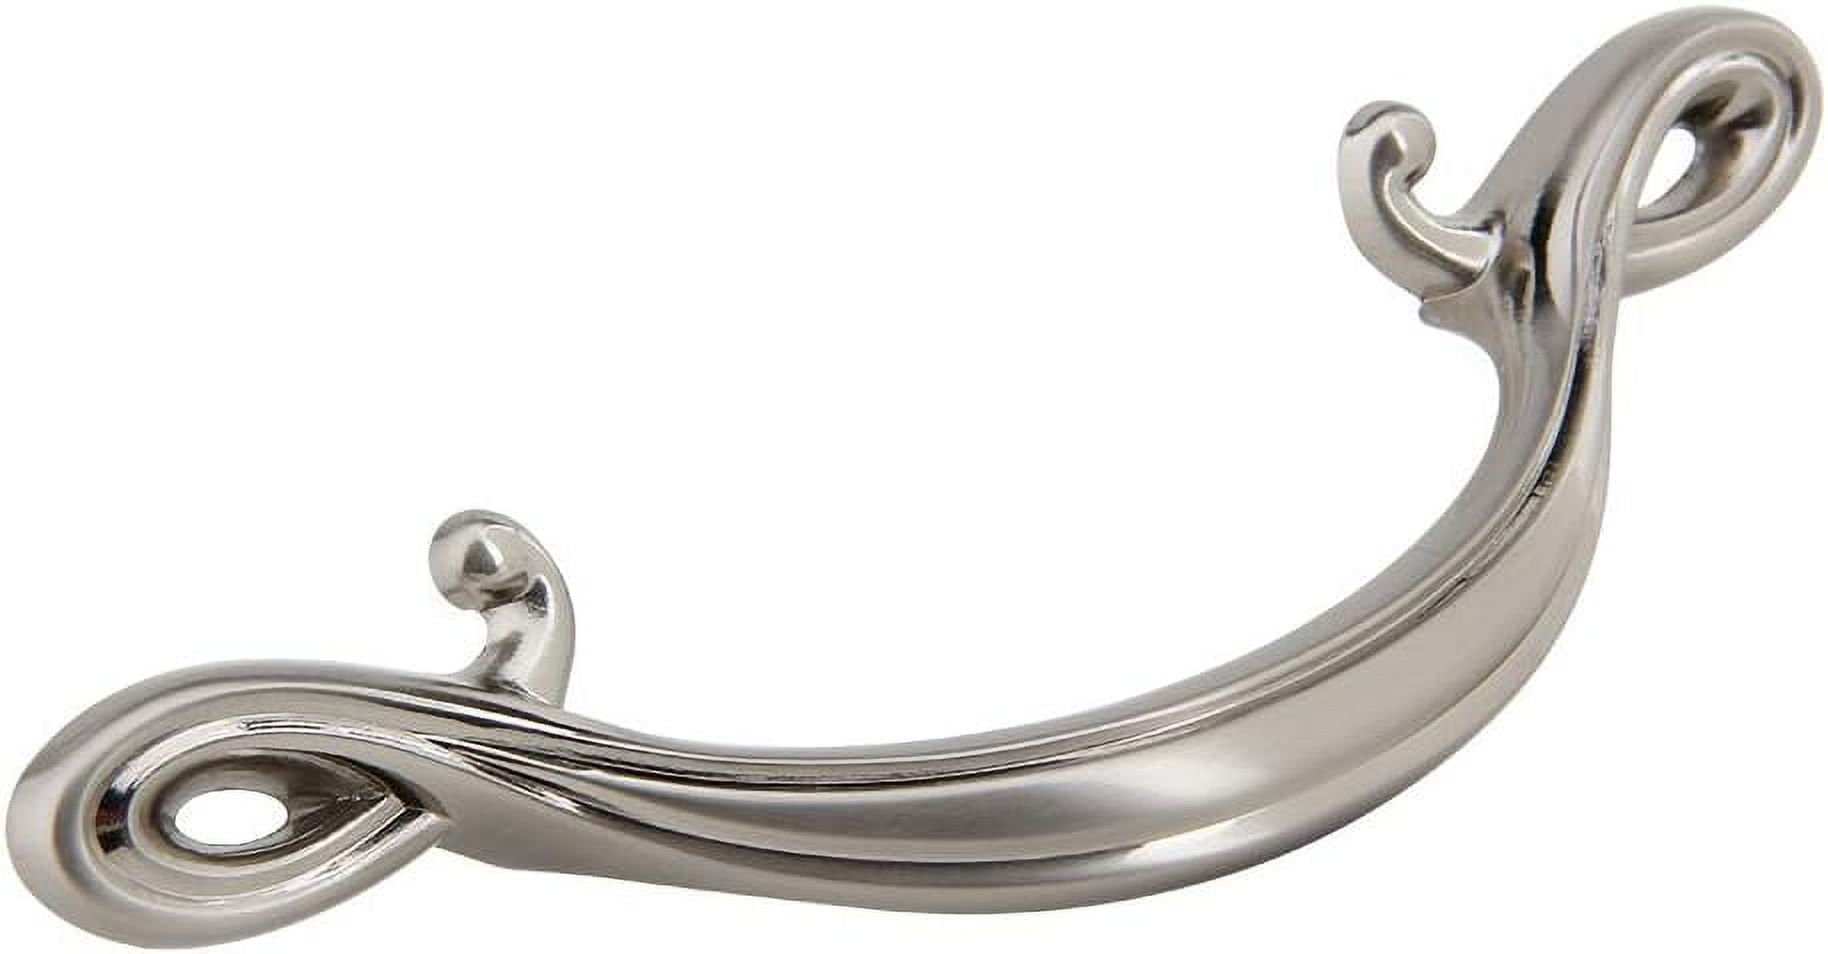 Cabinet Curved Arch Hardware Handle - Satin Nickel, 4" (102mm) Hole Centers Drawer Pull Kitchen Furniture Dresser Cupboard by Silverline - image 1 of 4